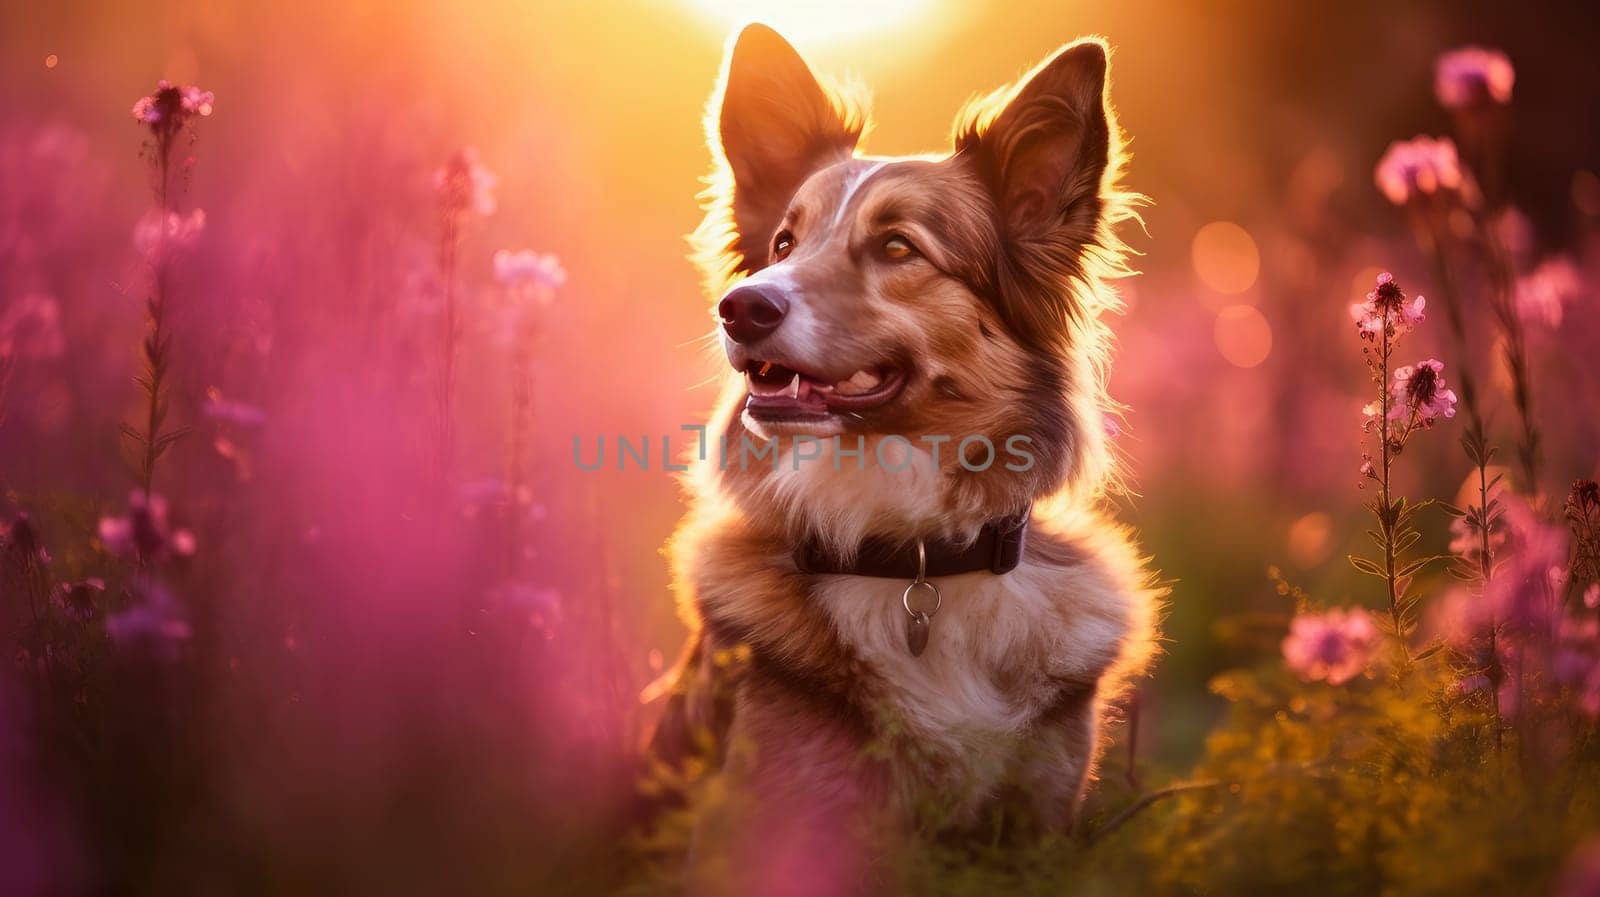 Cute, beautiful dog in a field with flowers in nature, in sunny pink rays. by Alla_Yurtayeva